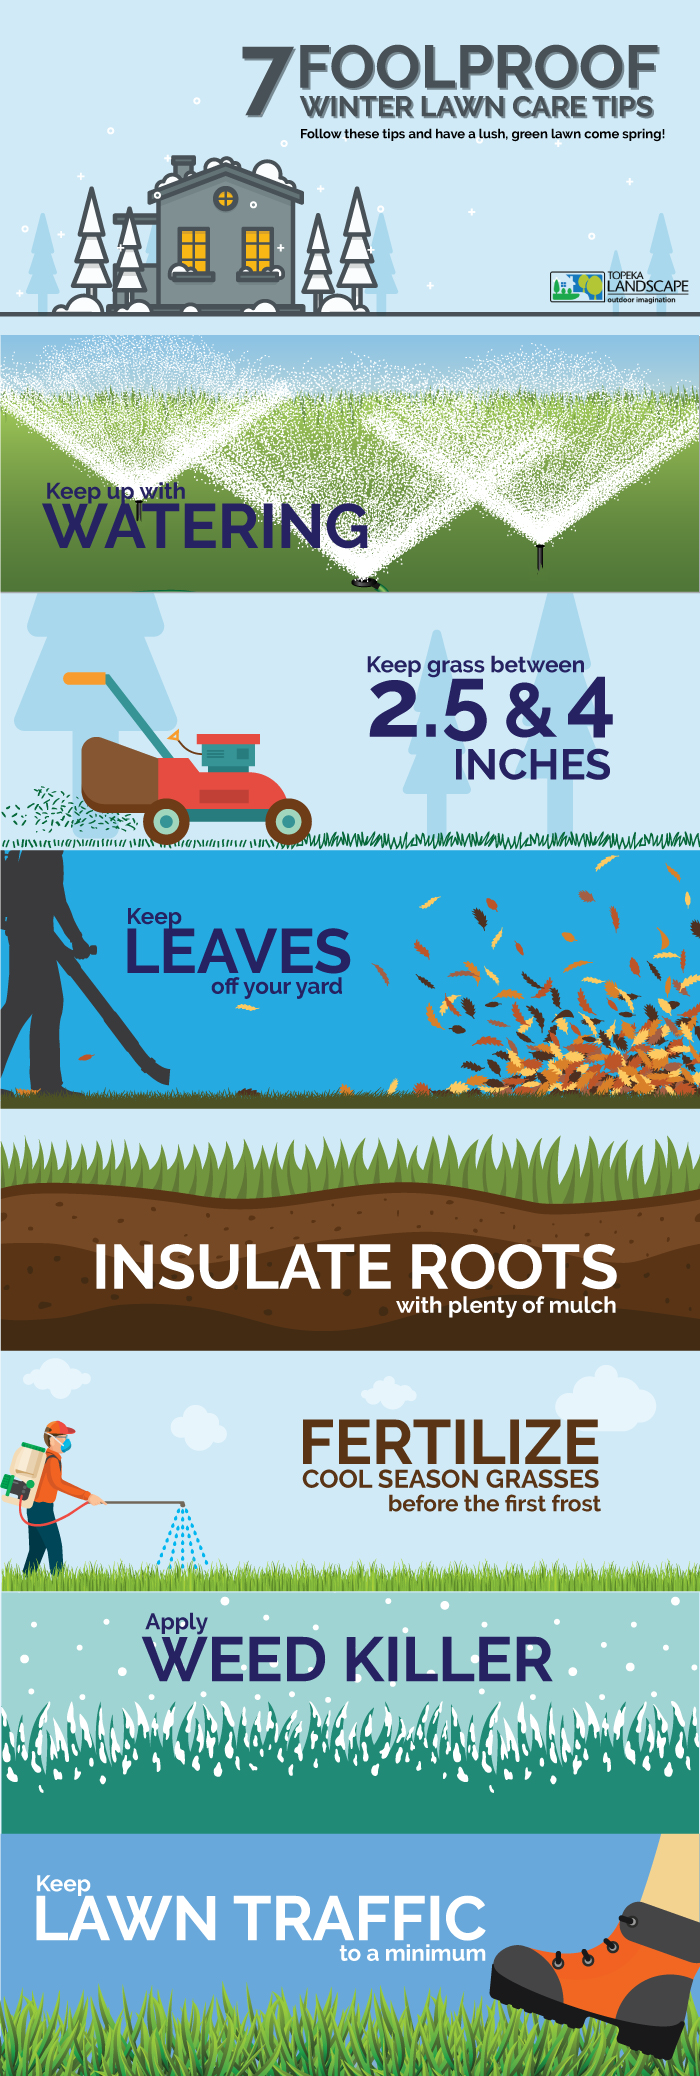 infographic, 7 winter lawn care tips. This includes watering, fertilizing cool season grasses, staying off the lawn and removing dead leaves in the fall. 